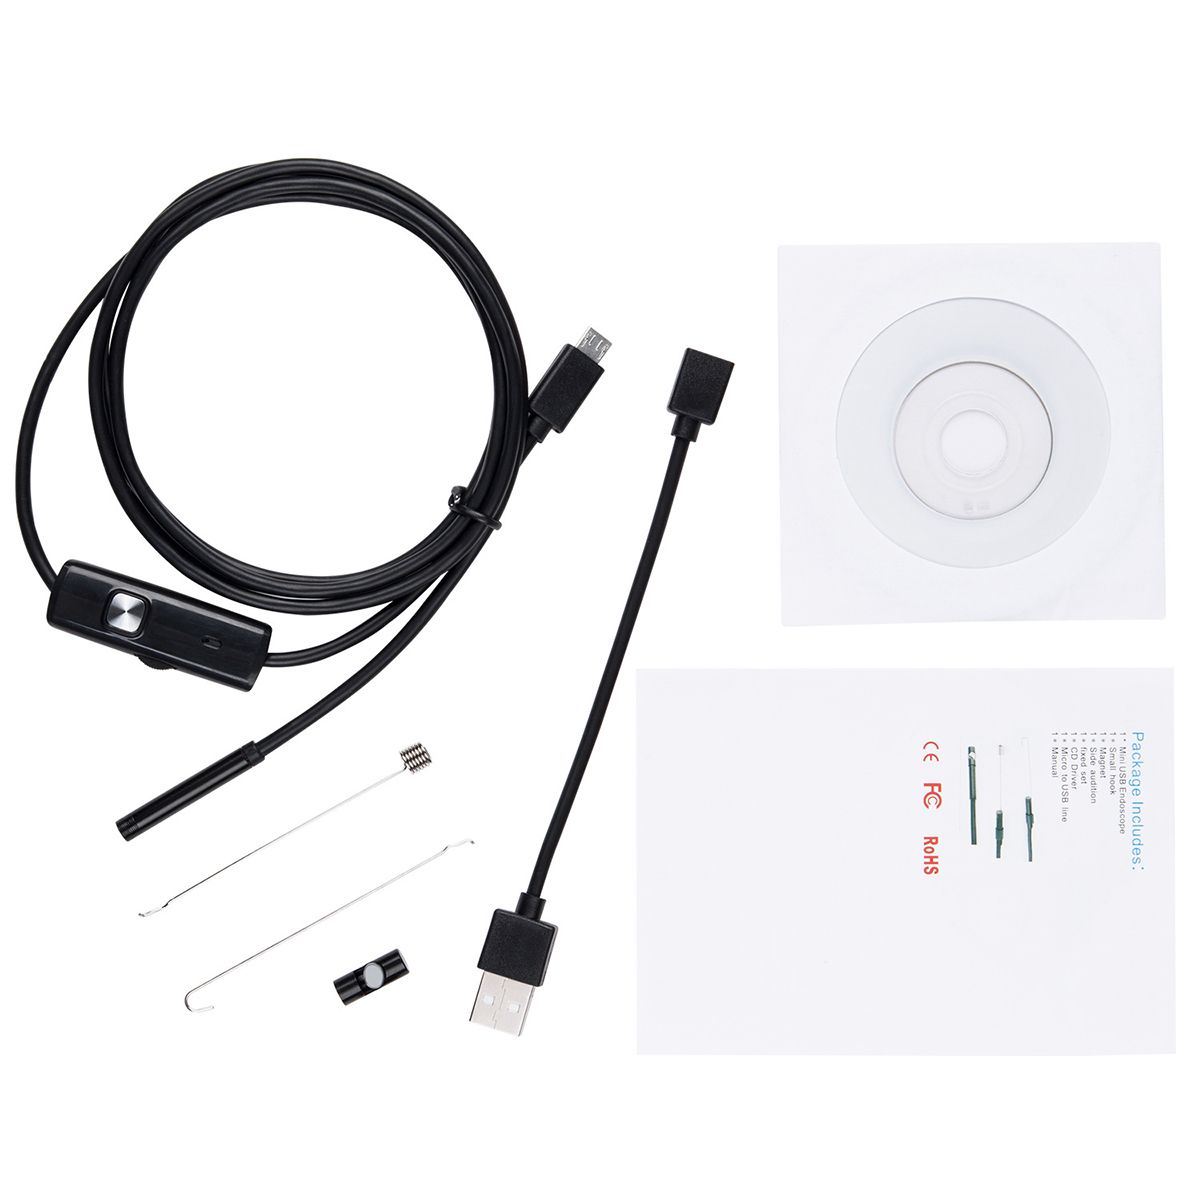 55mm-Lens-USB-Borescope-Snake-Inspection-Camera-Android-Mobile-Phone-10m5m2m1m-Soft-Wire-1612390